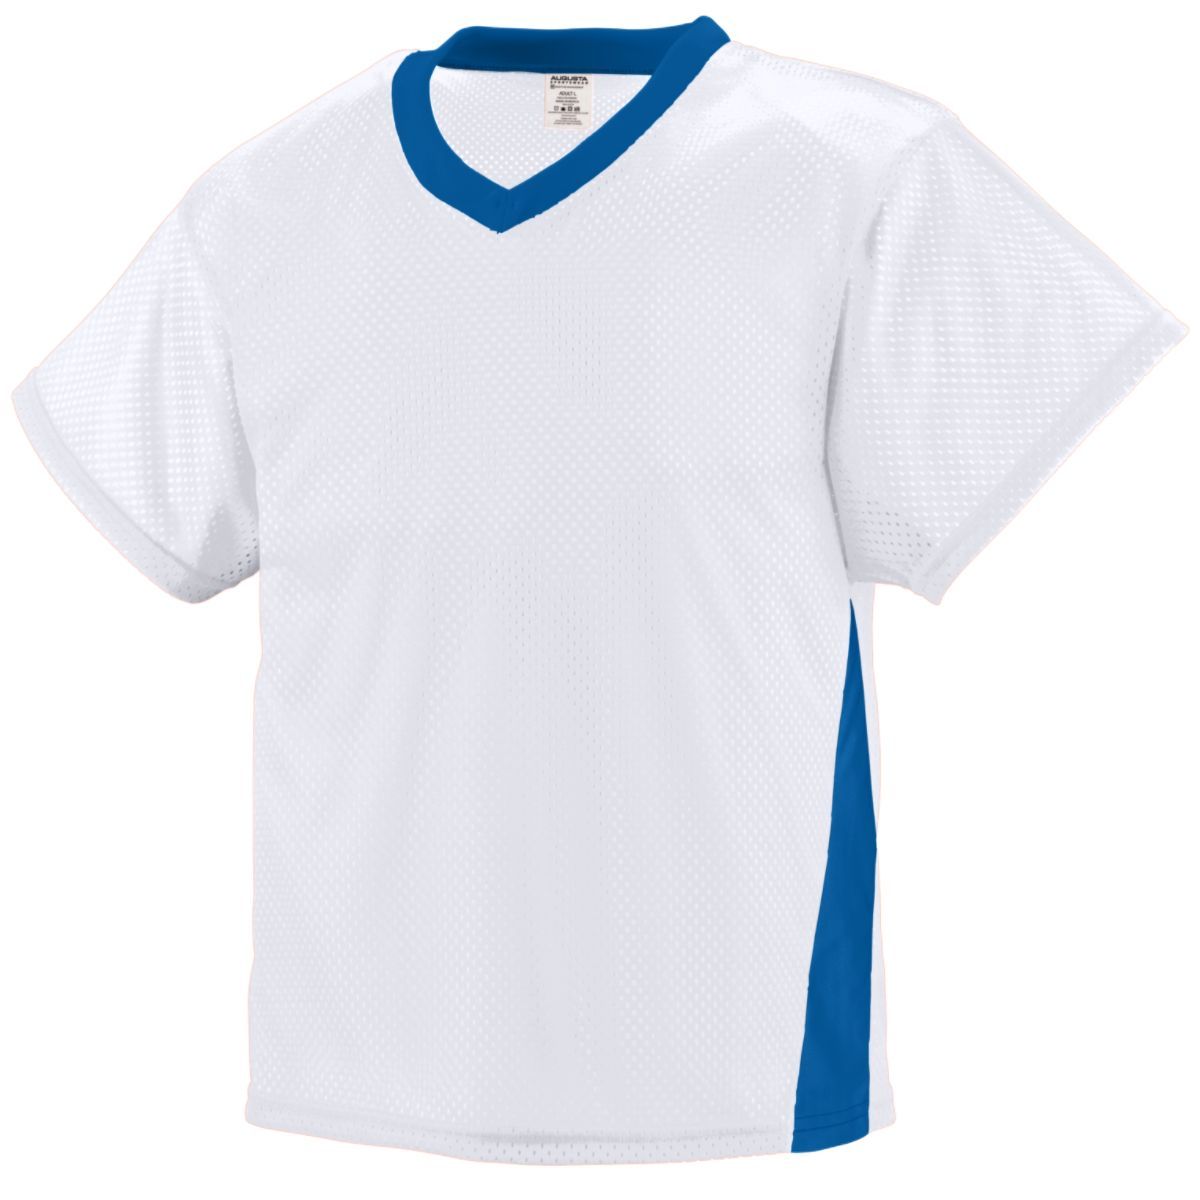 Augusta Sportswear High Score Jersey in White/Royal  -Part of the Adult, Adult-Jersey, Augusta-Products, Lacrosse, Shirts, All-Sports, All-Sports-1 product lines at KanaleyCreations.com